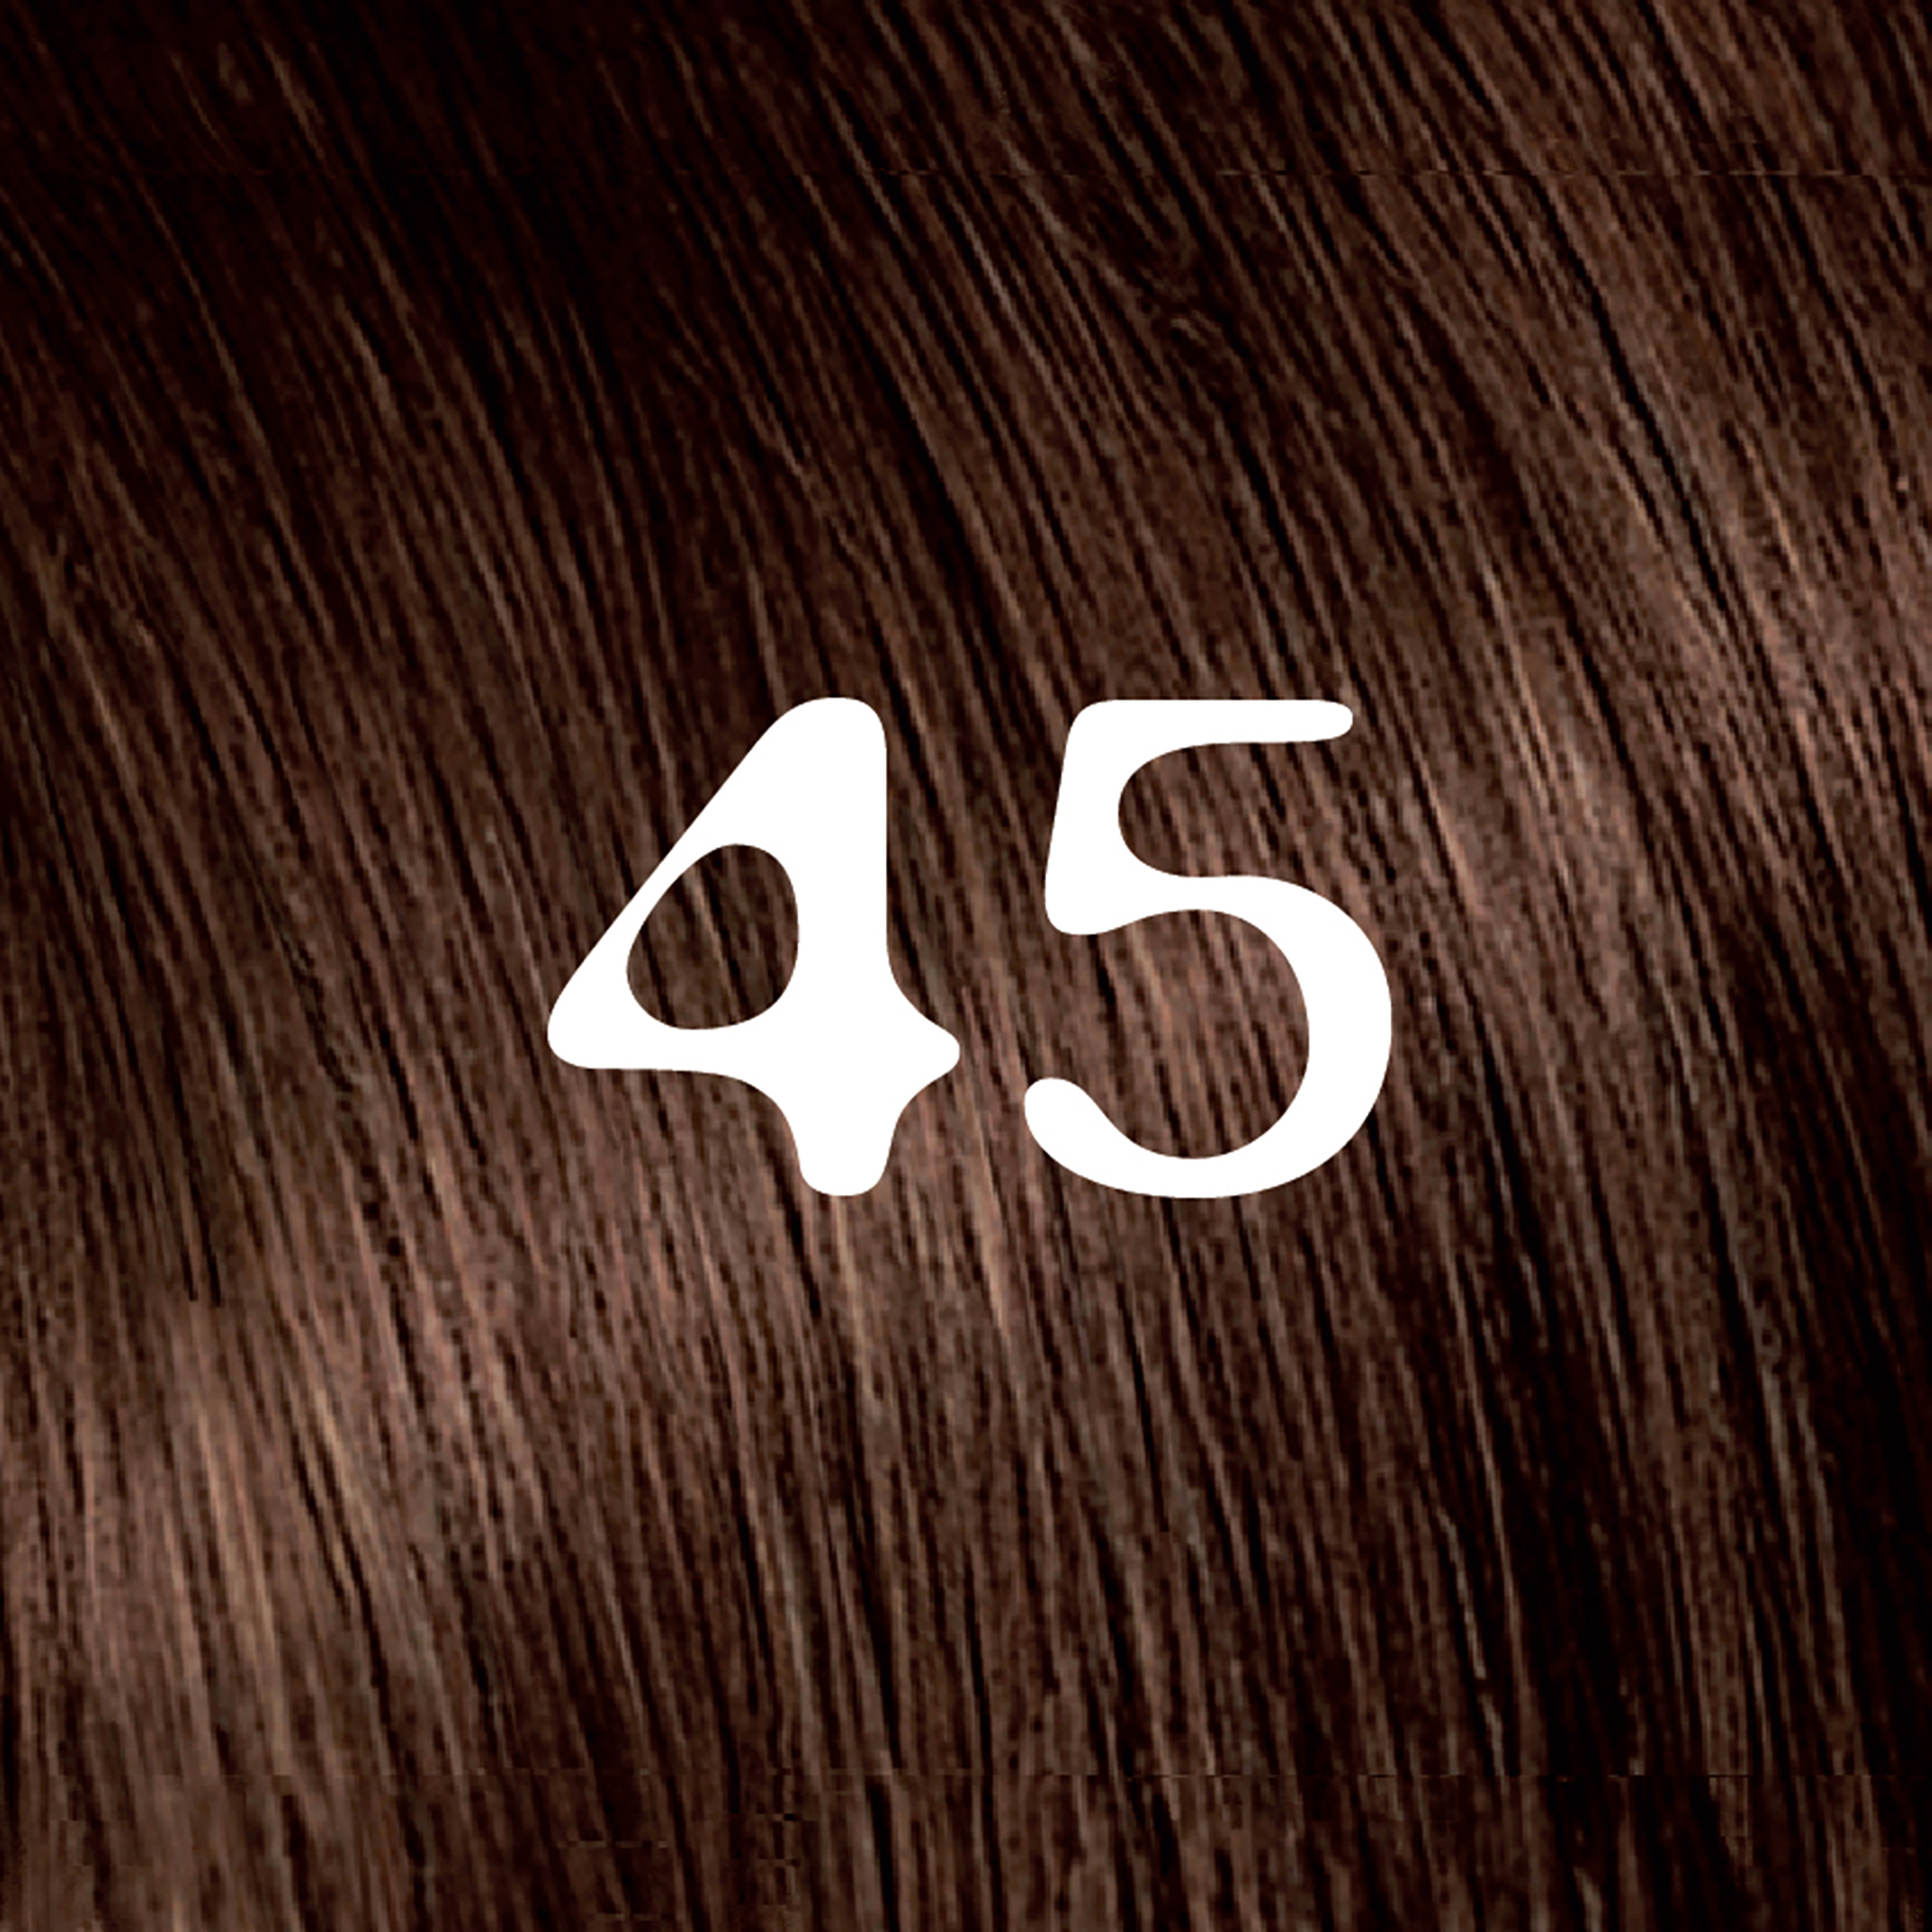 L'Oreal Paris Feria Permanent Hair Color, 45 French Roast Deep Bronzed Brown - image 3 of 9